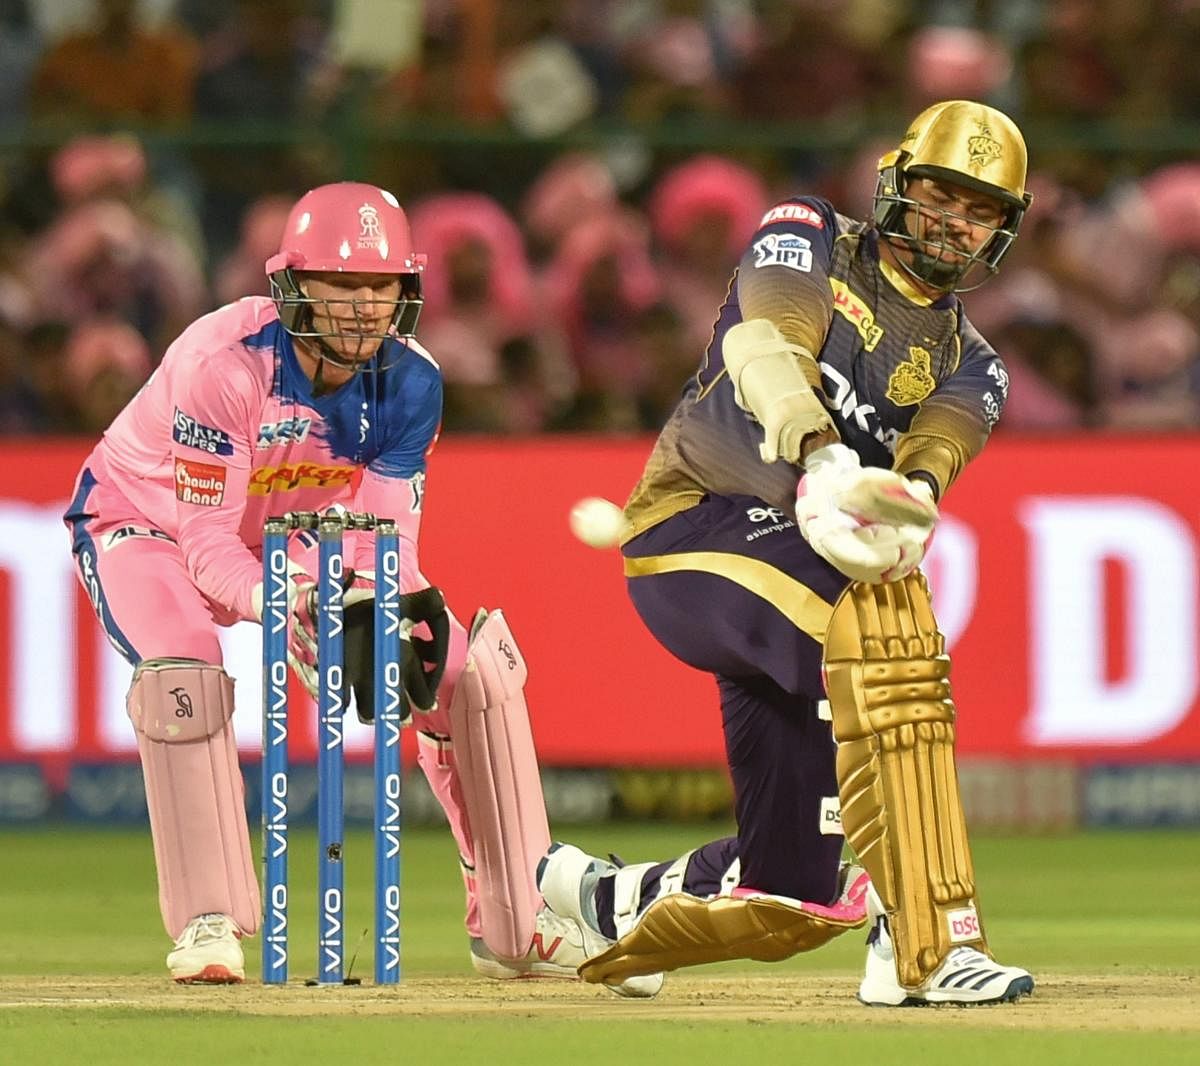 KKR's Sunil Narine sweeps one to the boundary against Rajasthan Royals on Sunday. PTI